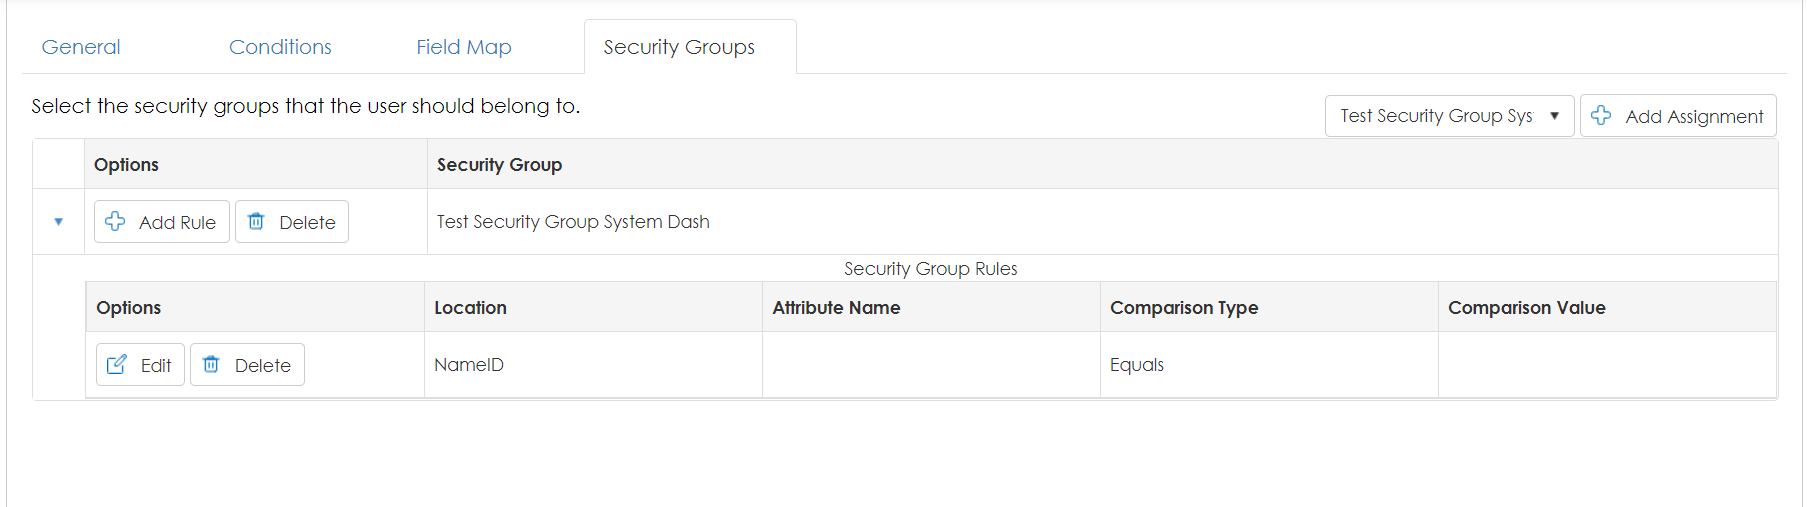 Definitions - Security Group